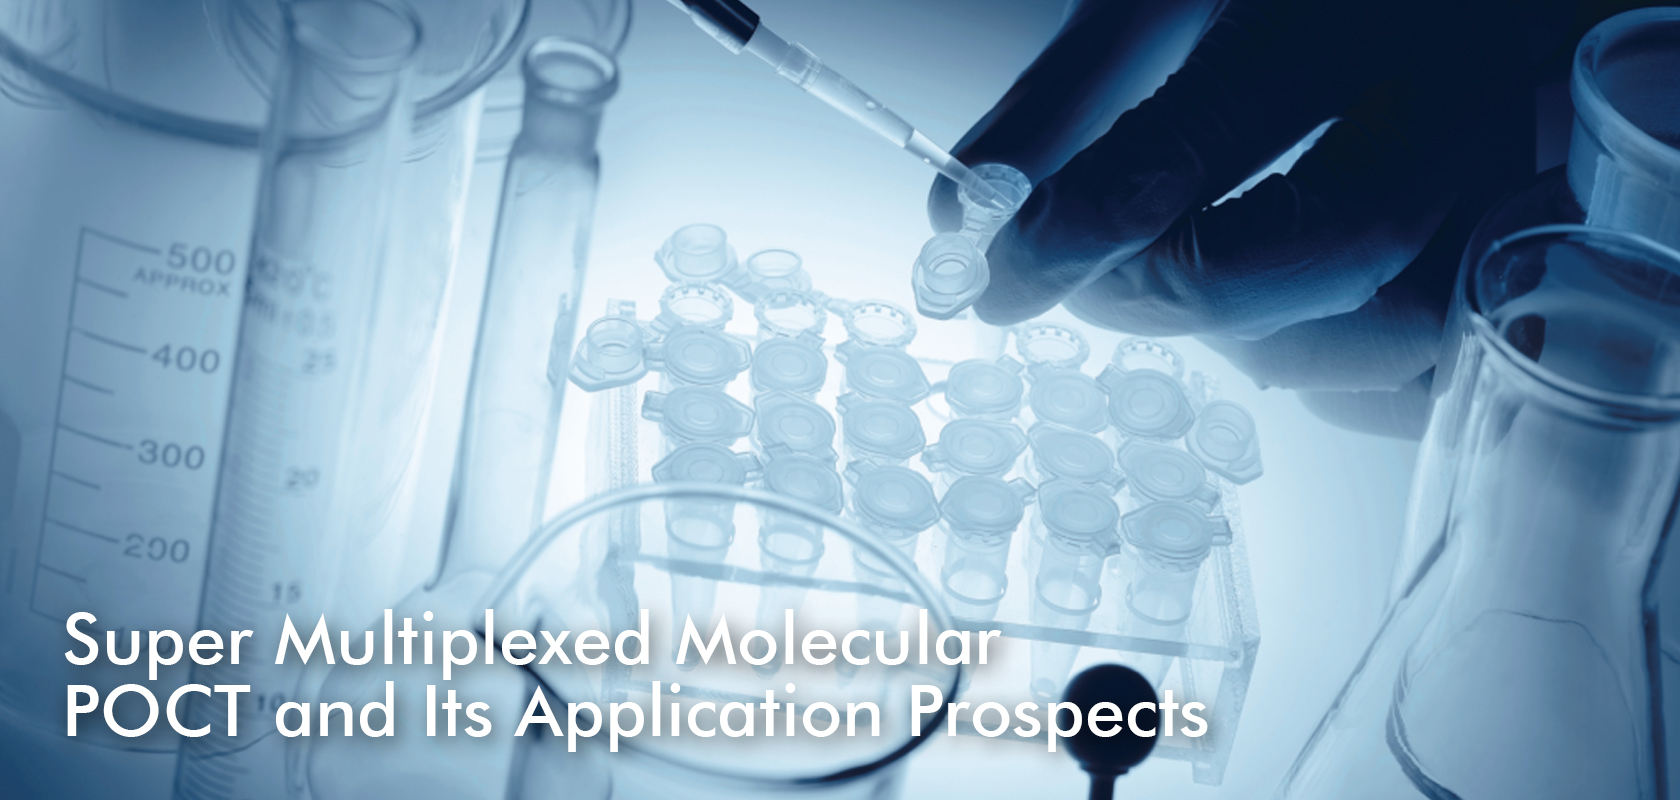 Super Multiplexed Molecular POCT and Its Application Prospects